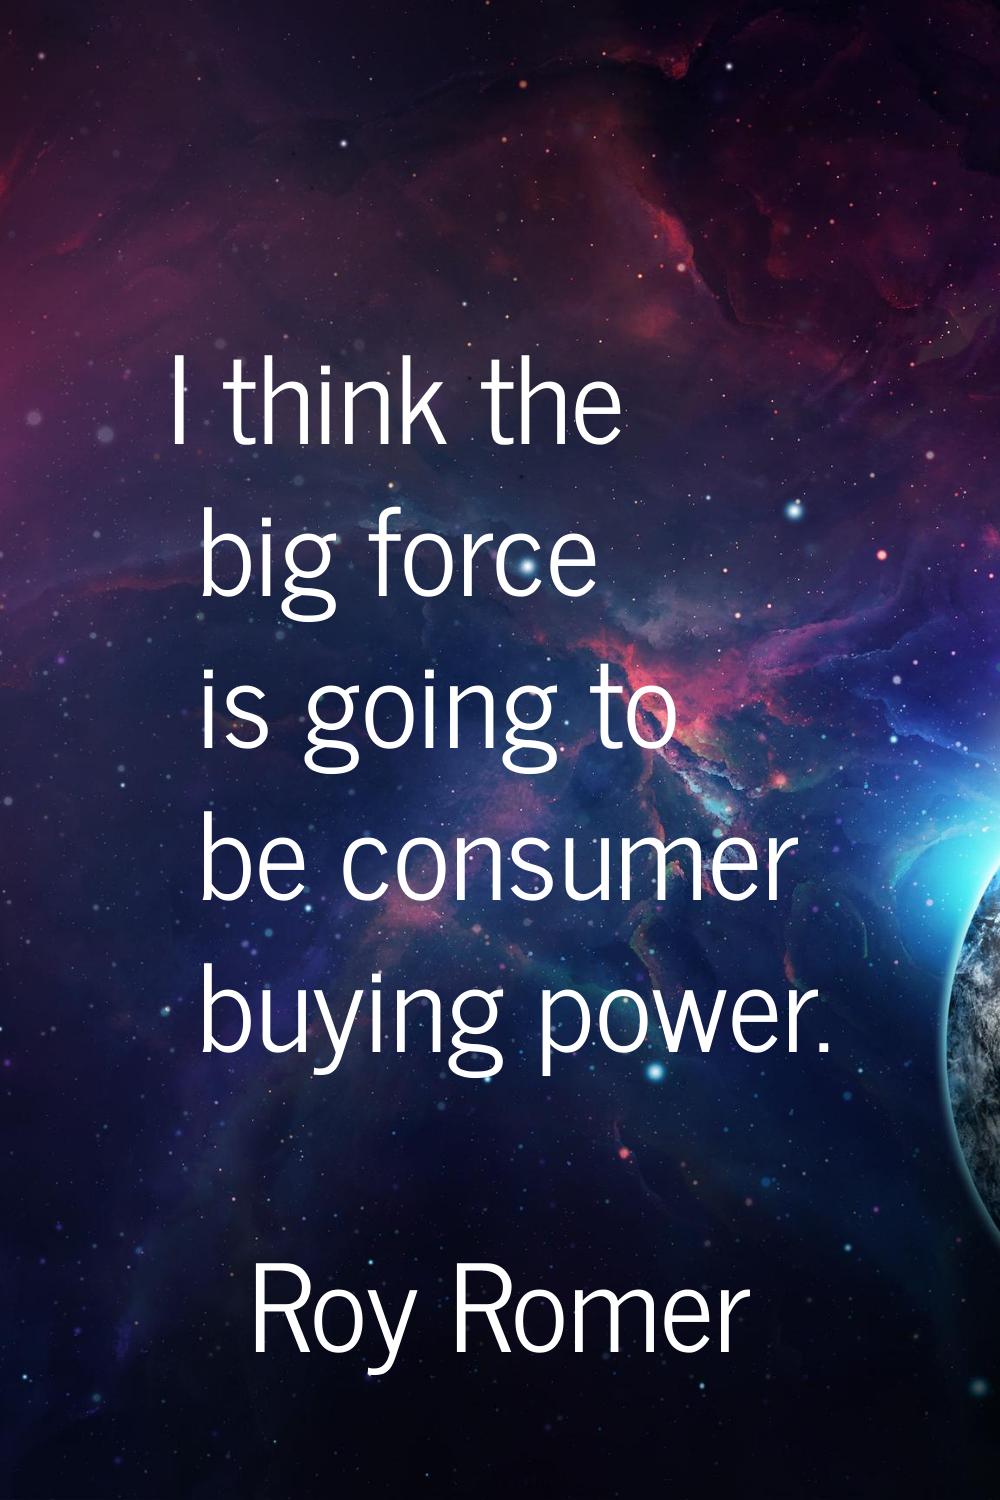 I think the big force is going to be consumer buying power.